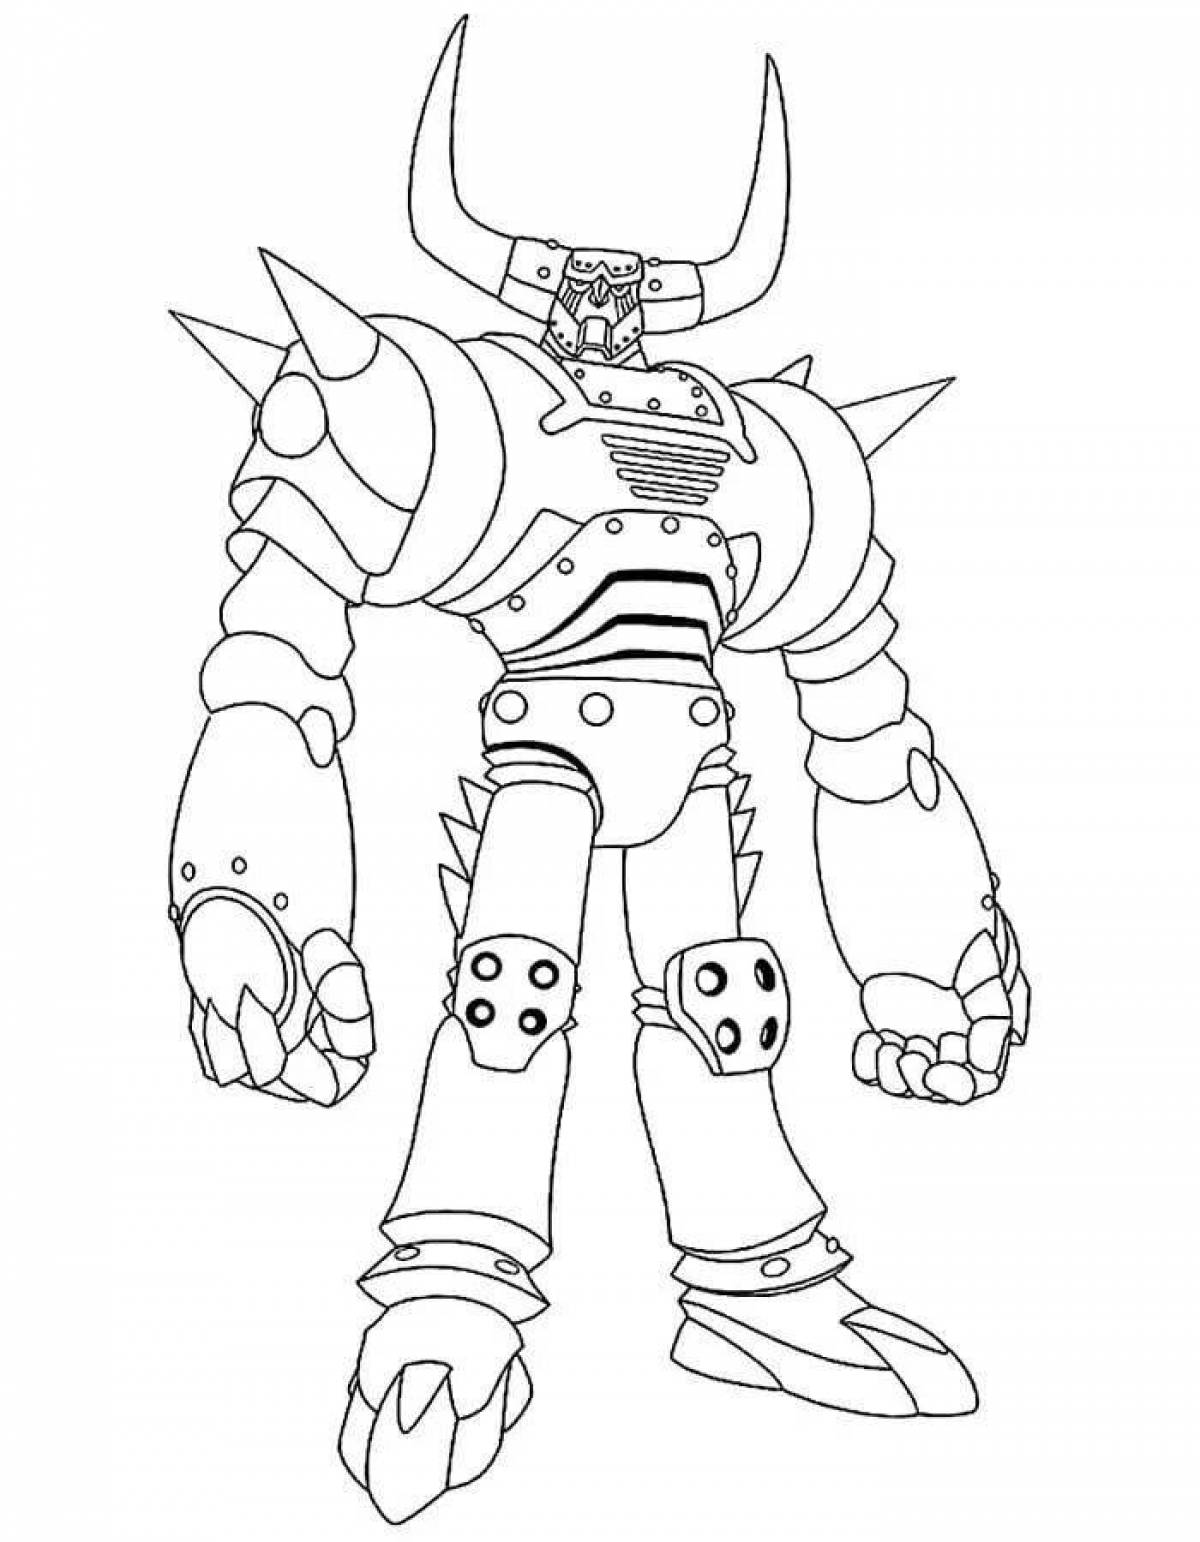 Coloring pages with playful robots for boys 6-7 years old